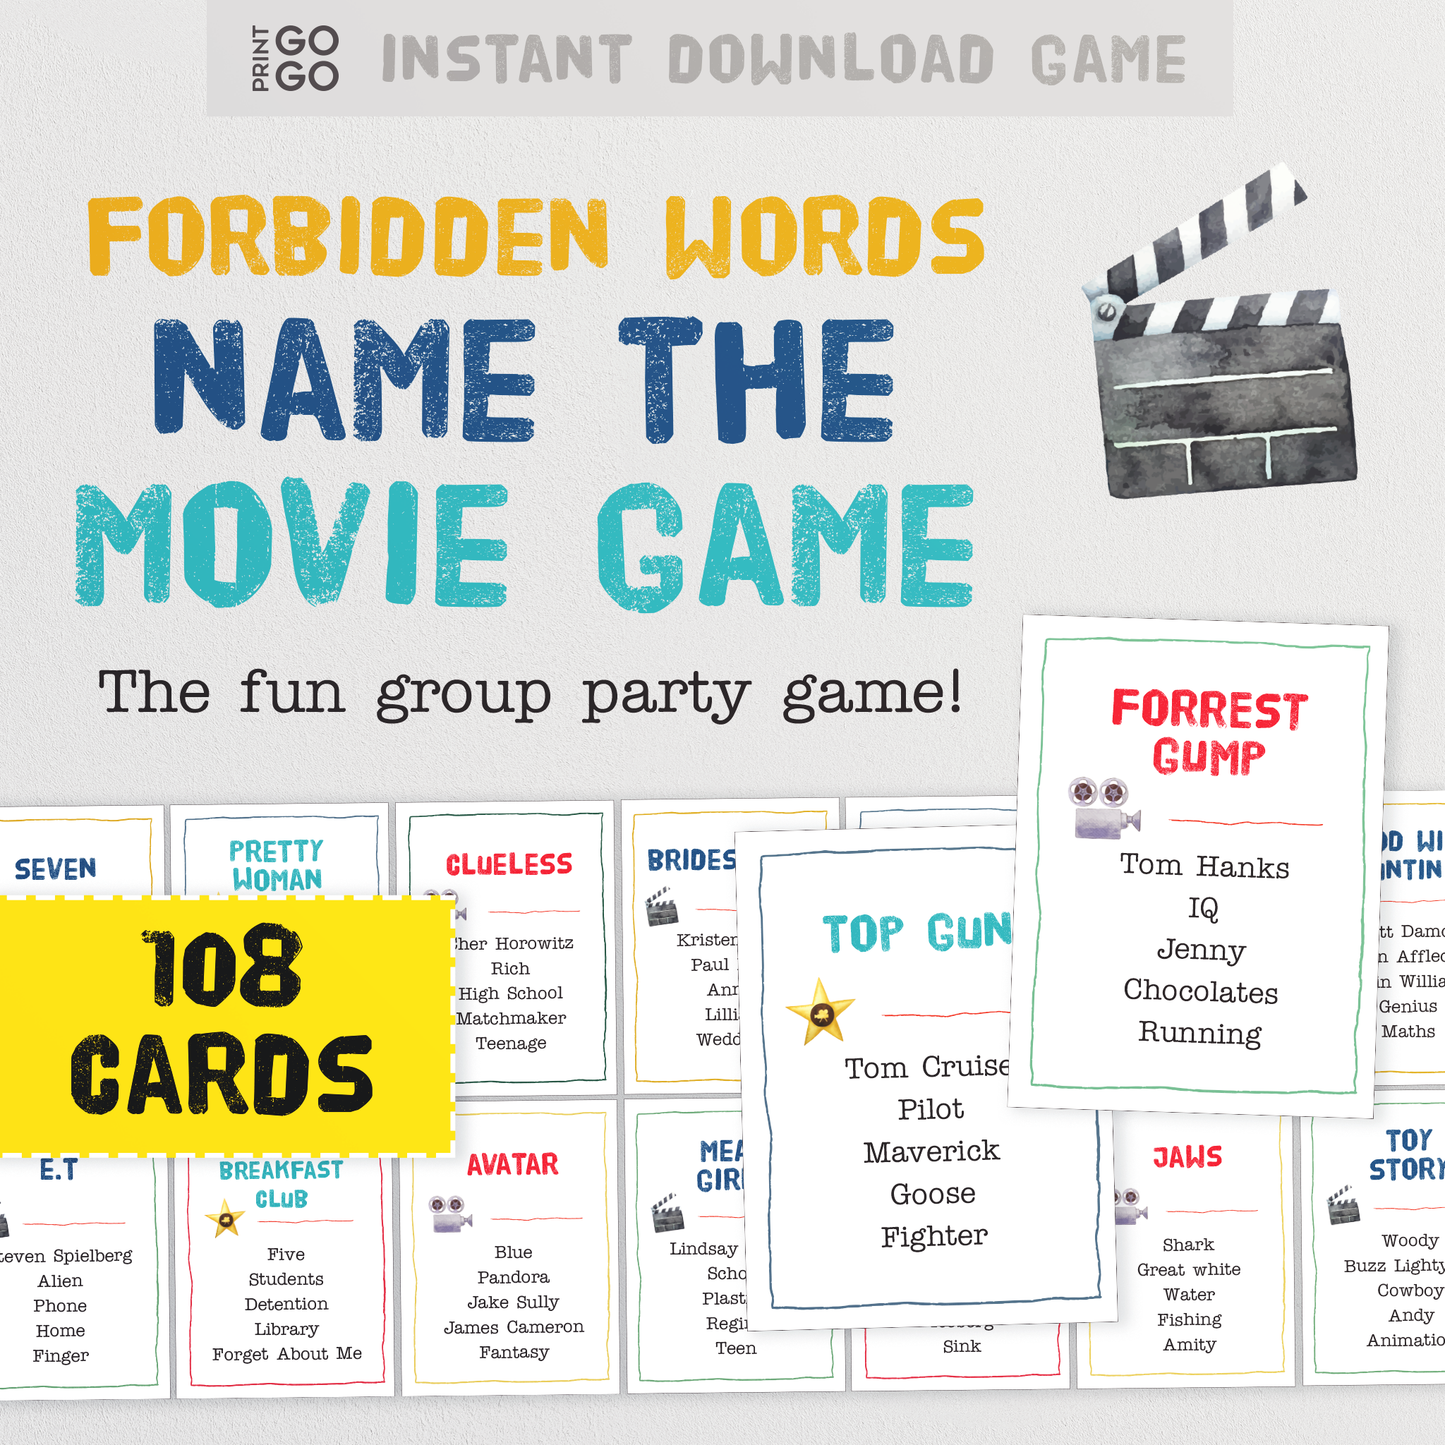 Forbidden Words Name The Movie - The Hilarious Taboo Style Party Game!